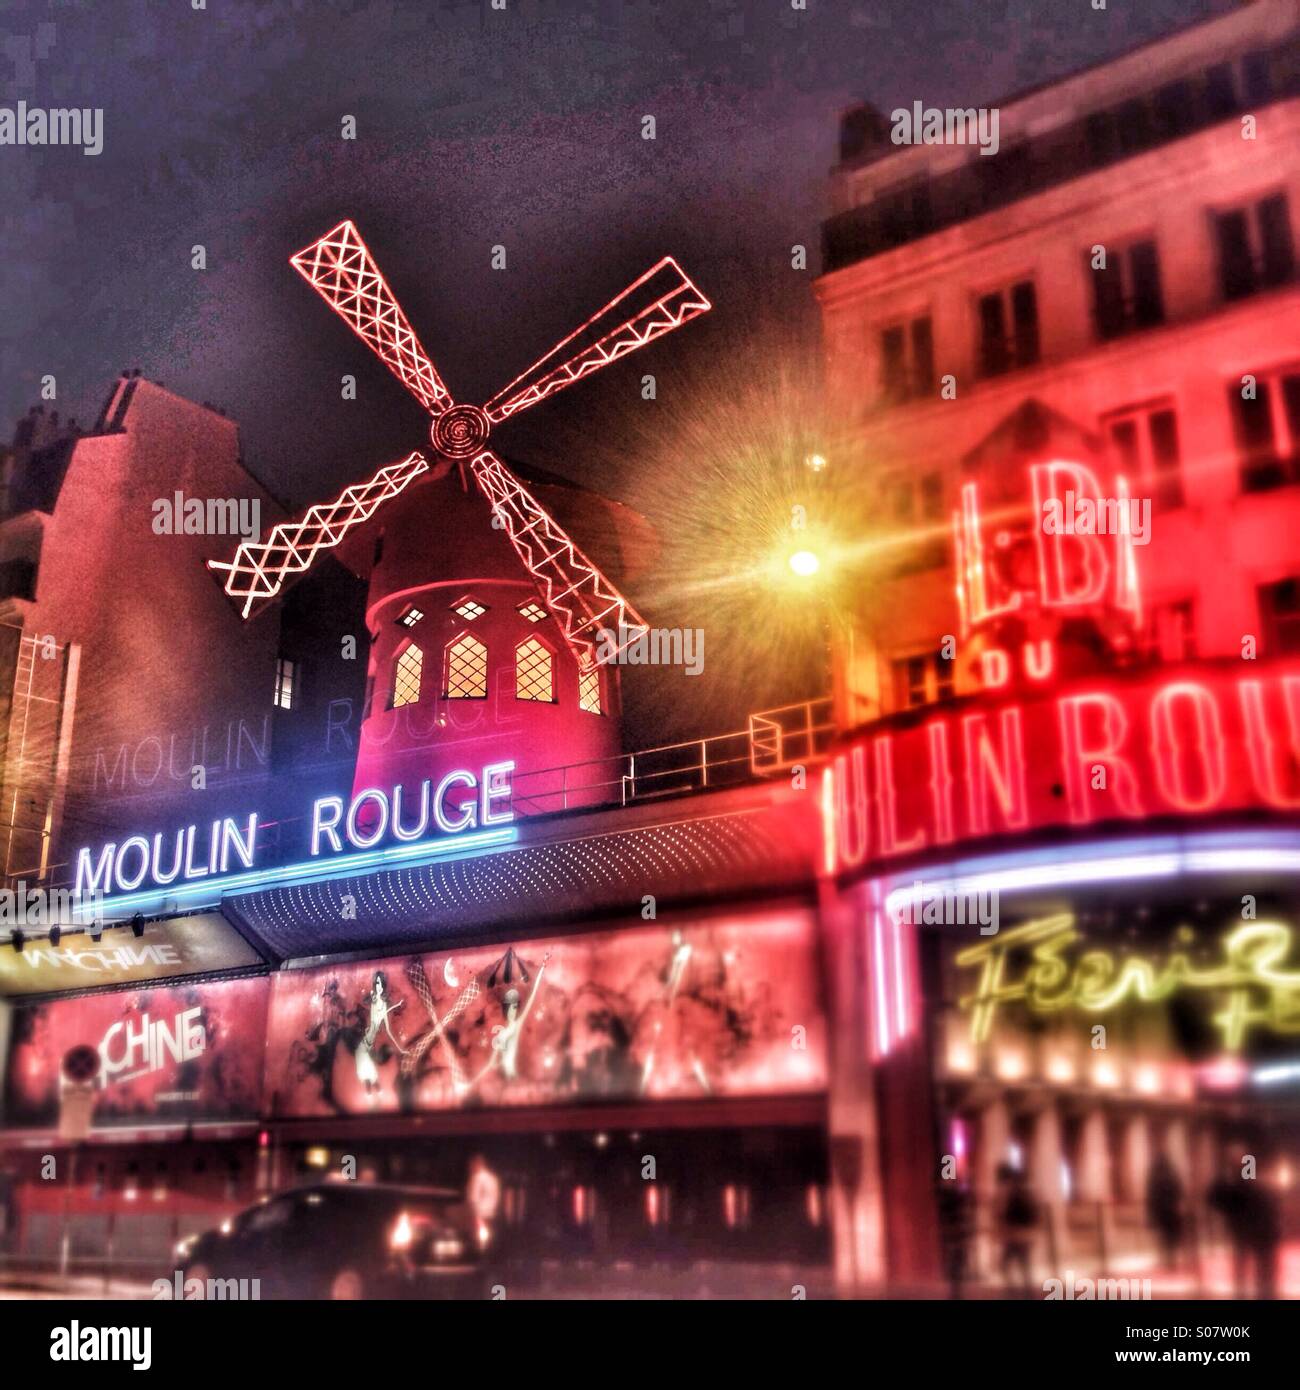 The Moulin Rouge Cabaret in Paris France. Stock Photo